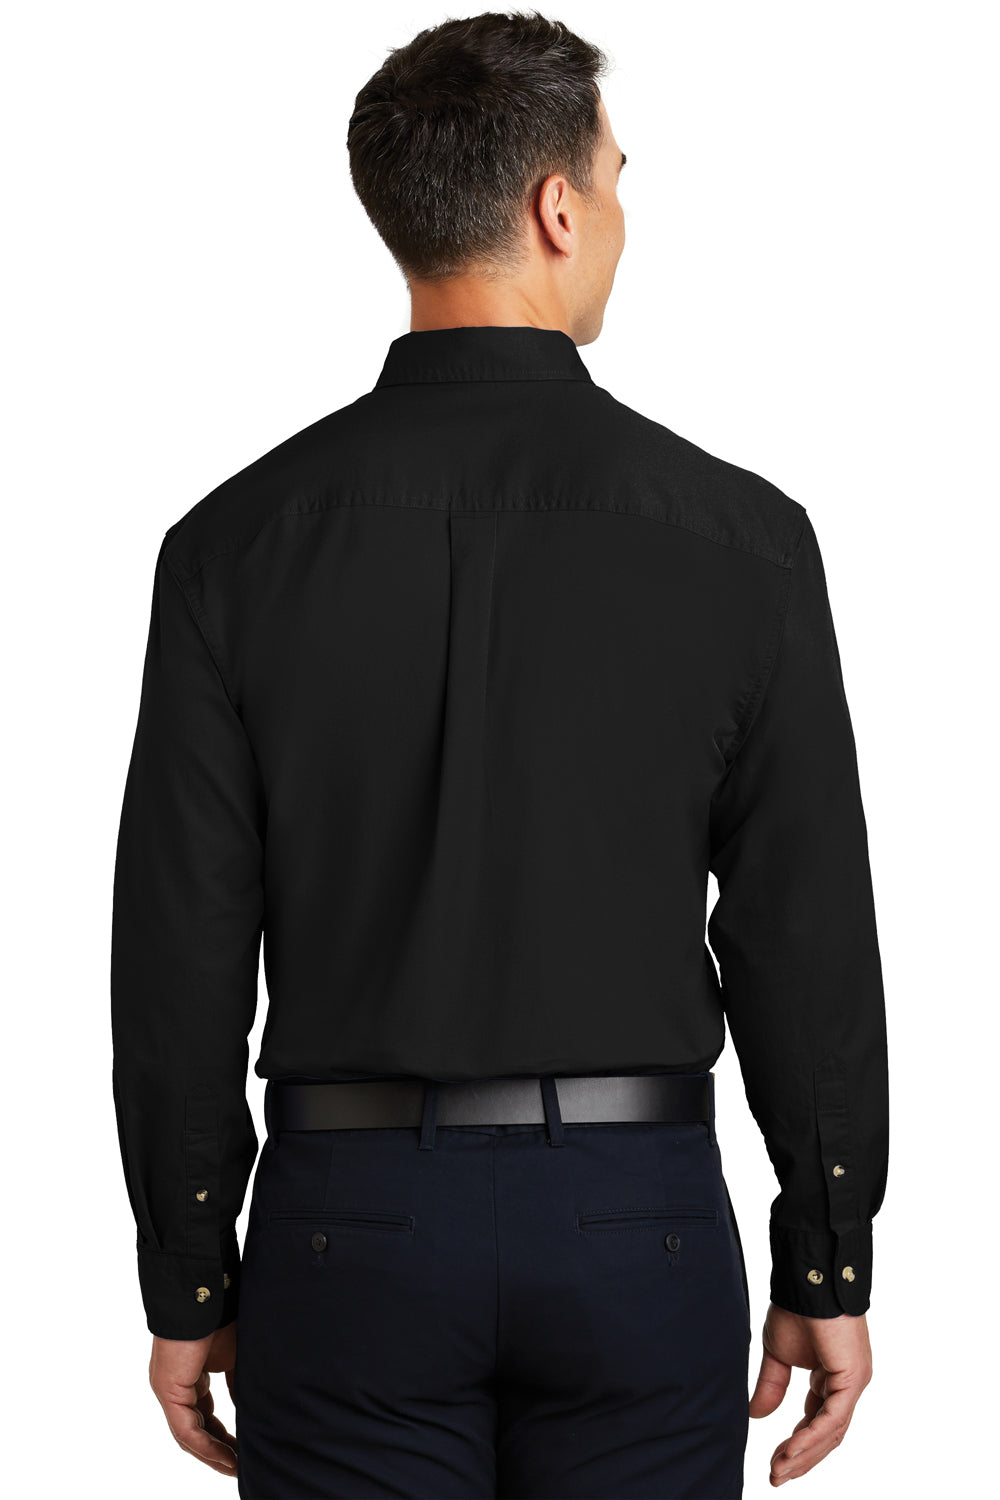 Port Authority S600T Mens Long Sleeve Button Down Shirt w/ Pocket Black Back